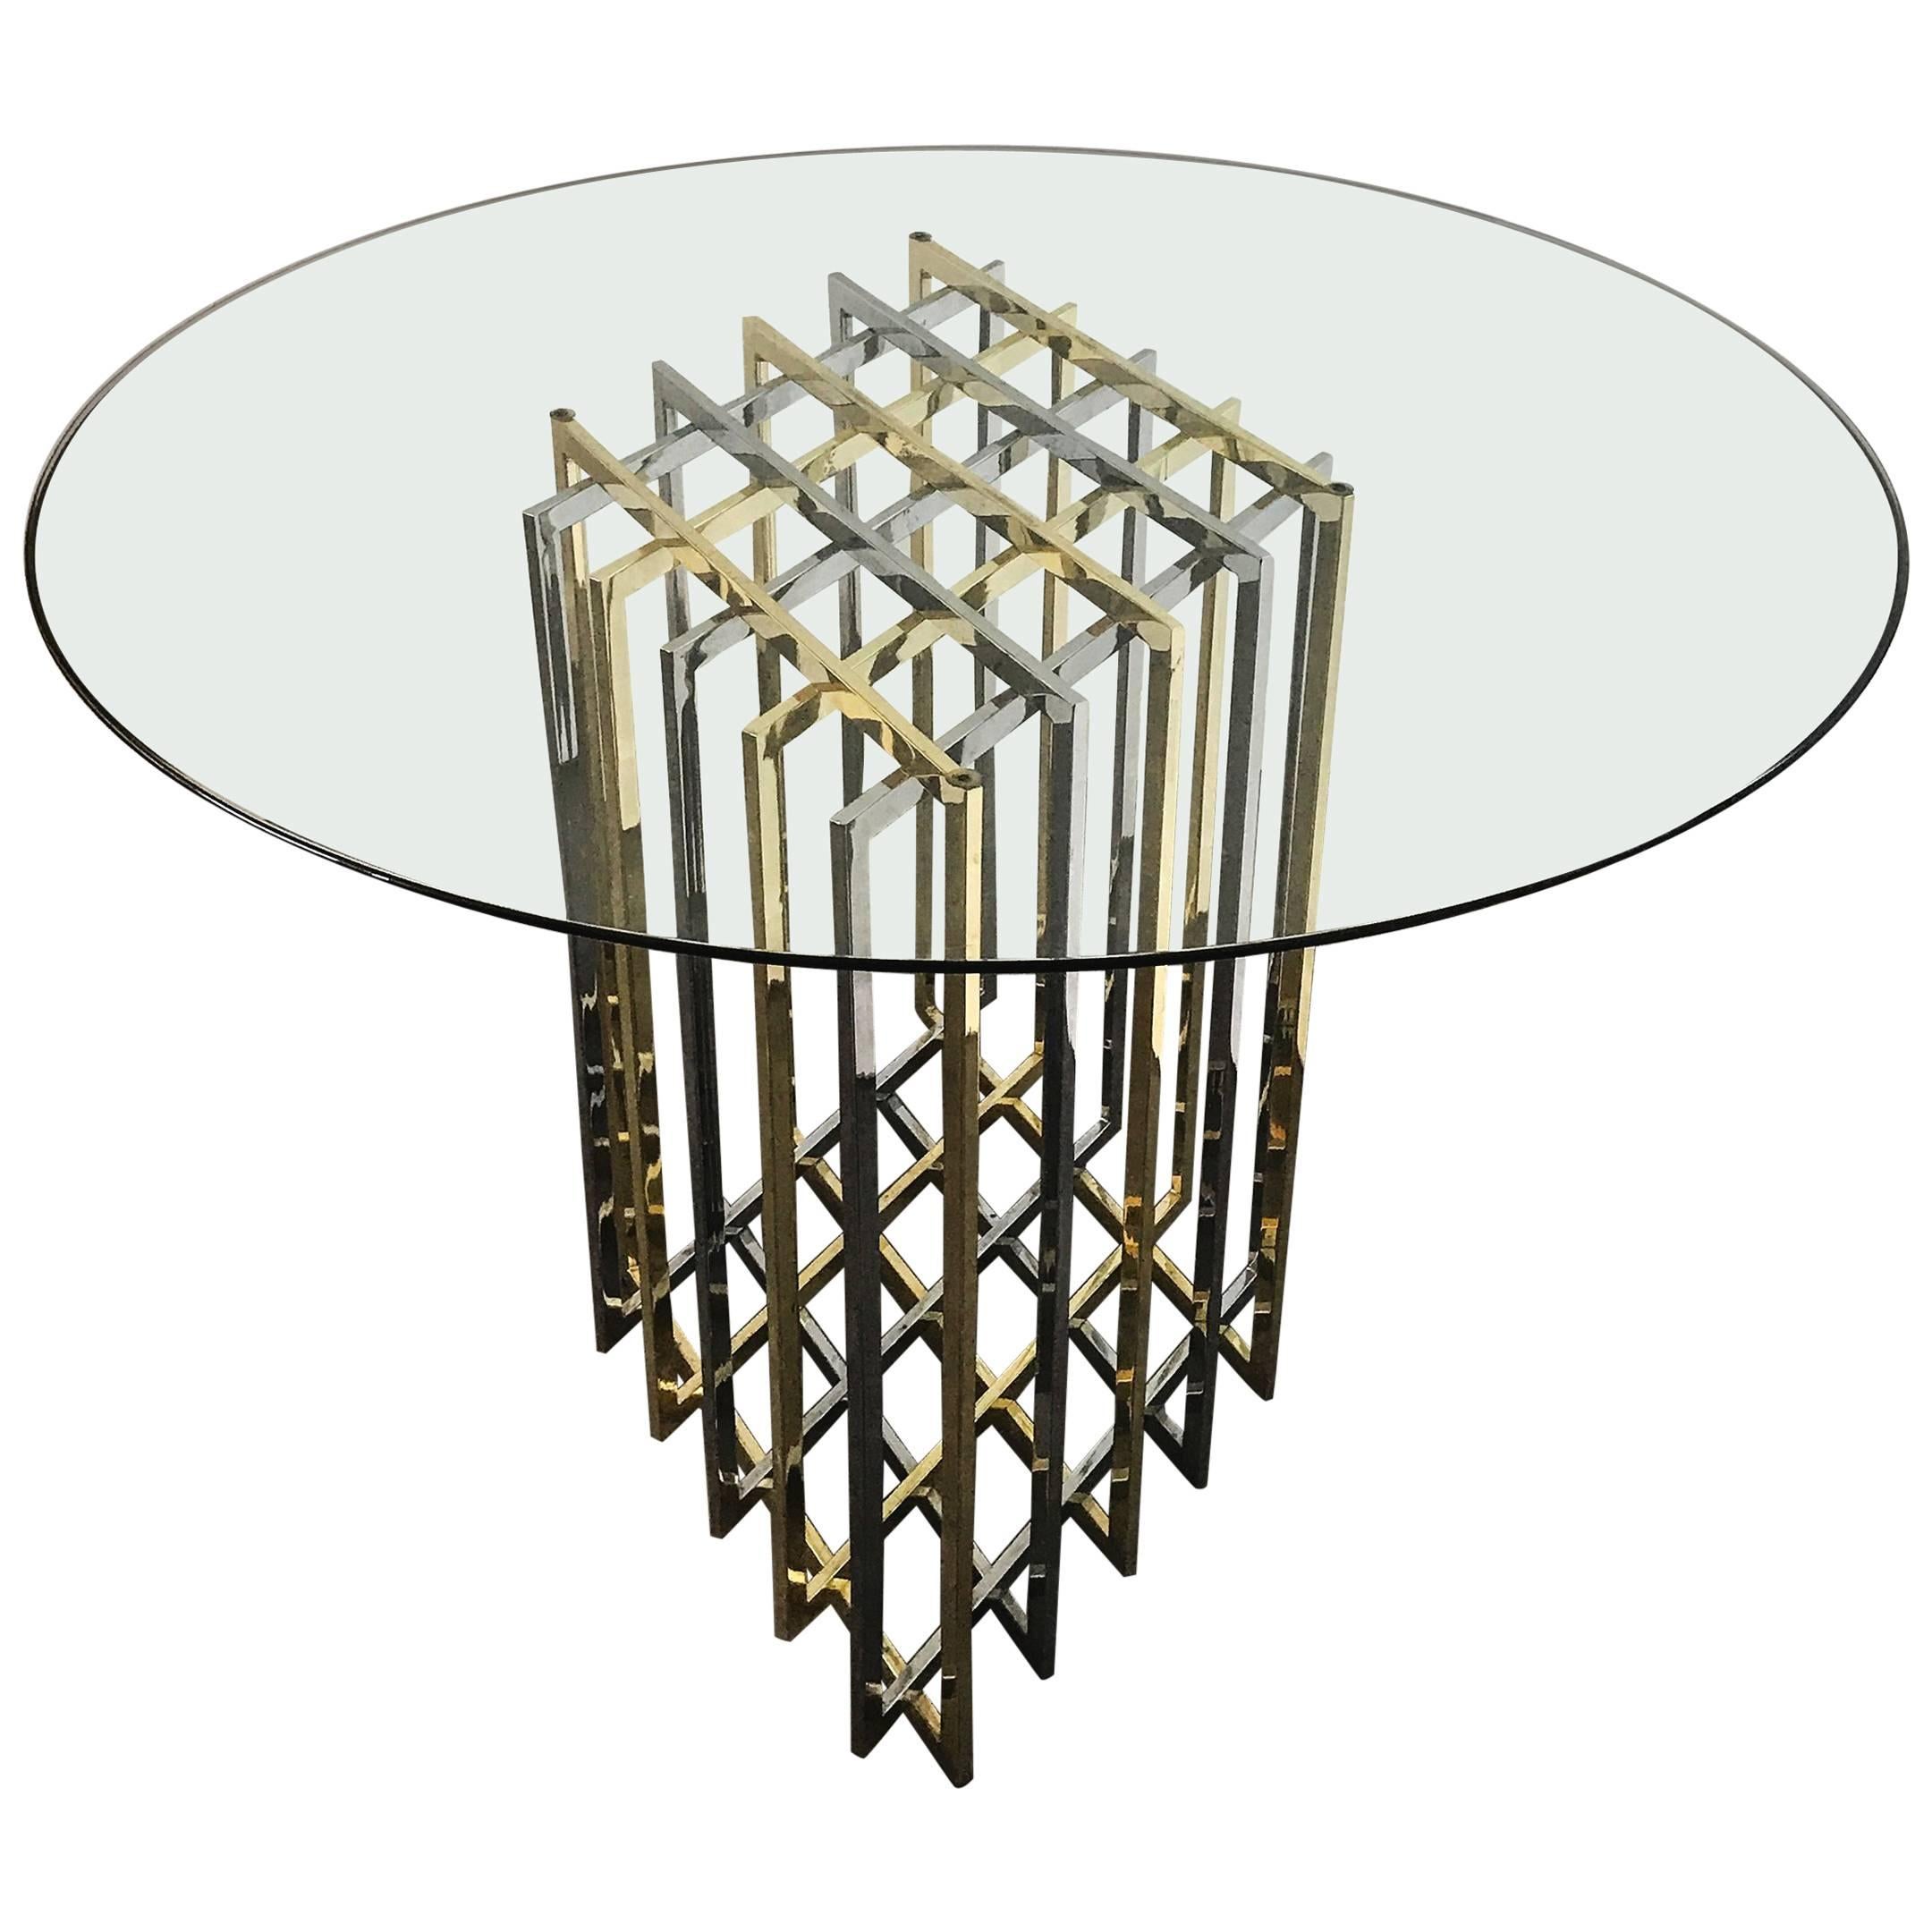 Pierre Cardin Chrome and Brass Grid Dining Table